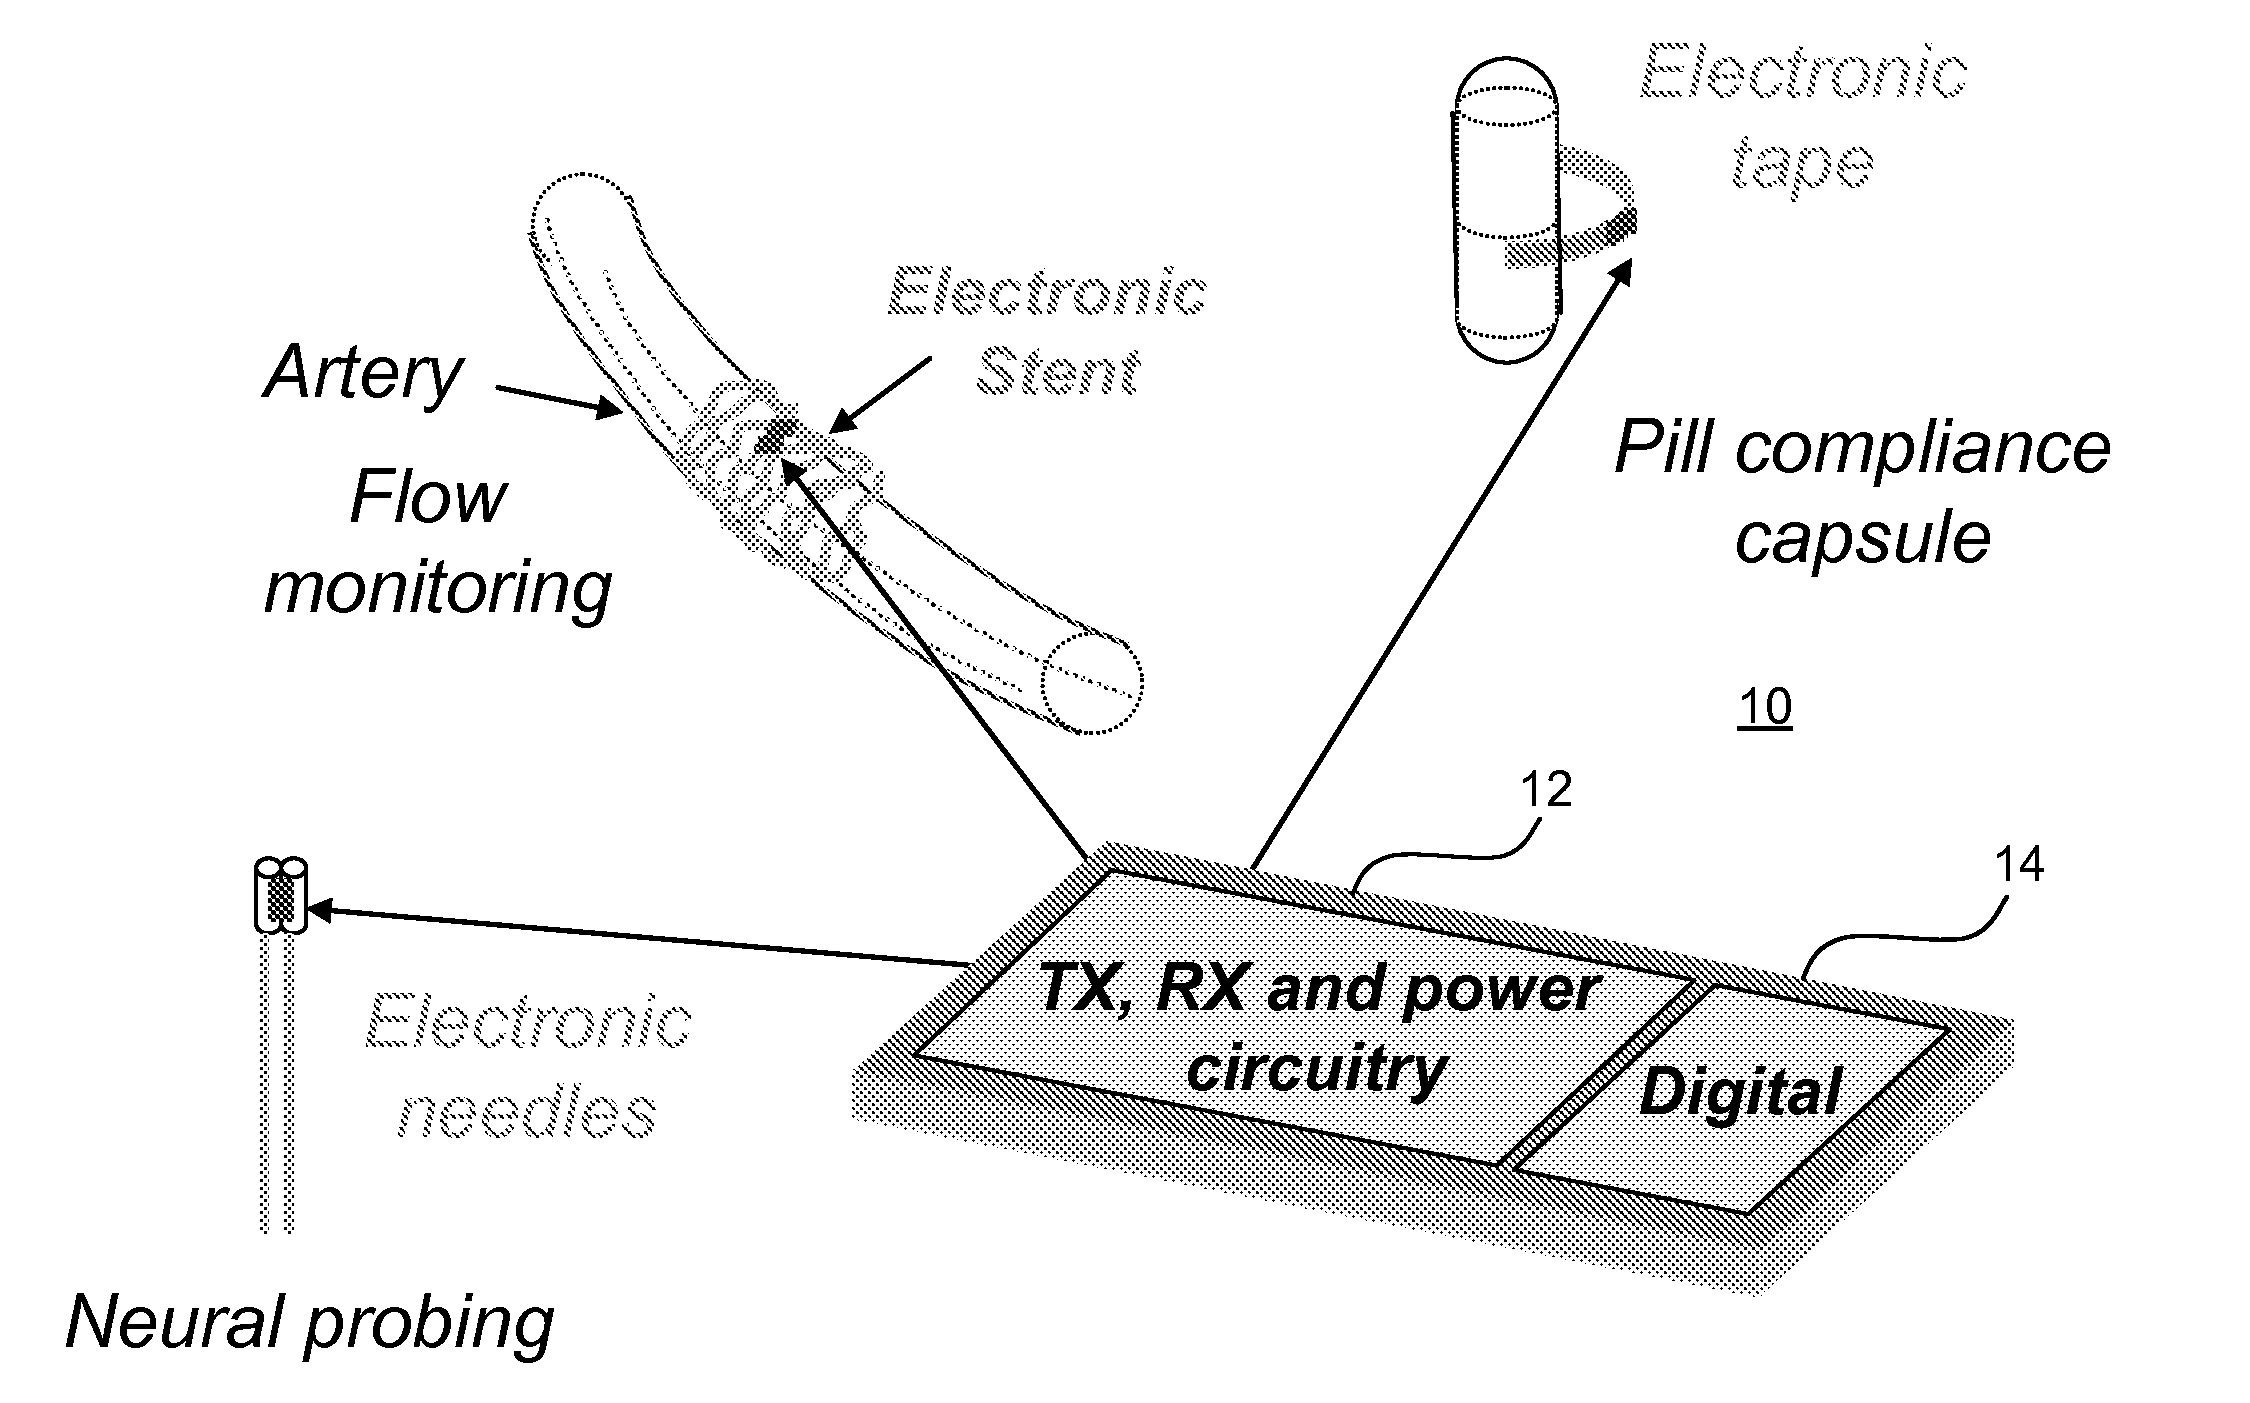 Miniaturized electronic device ingestible by a subject or implantable inside a body of the subject